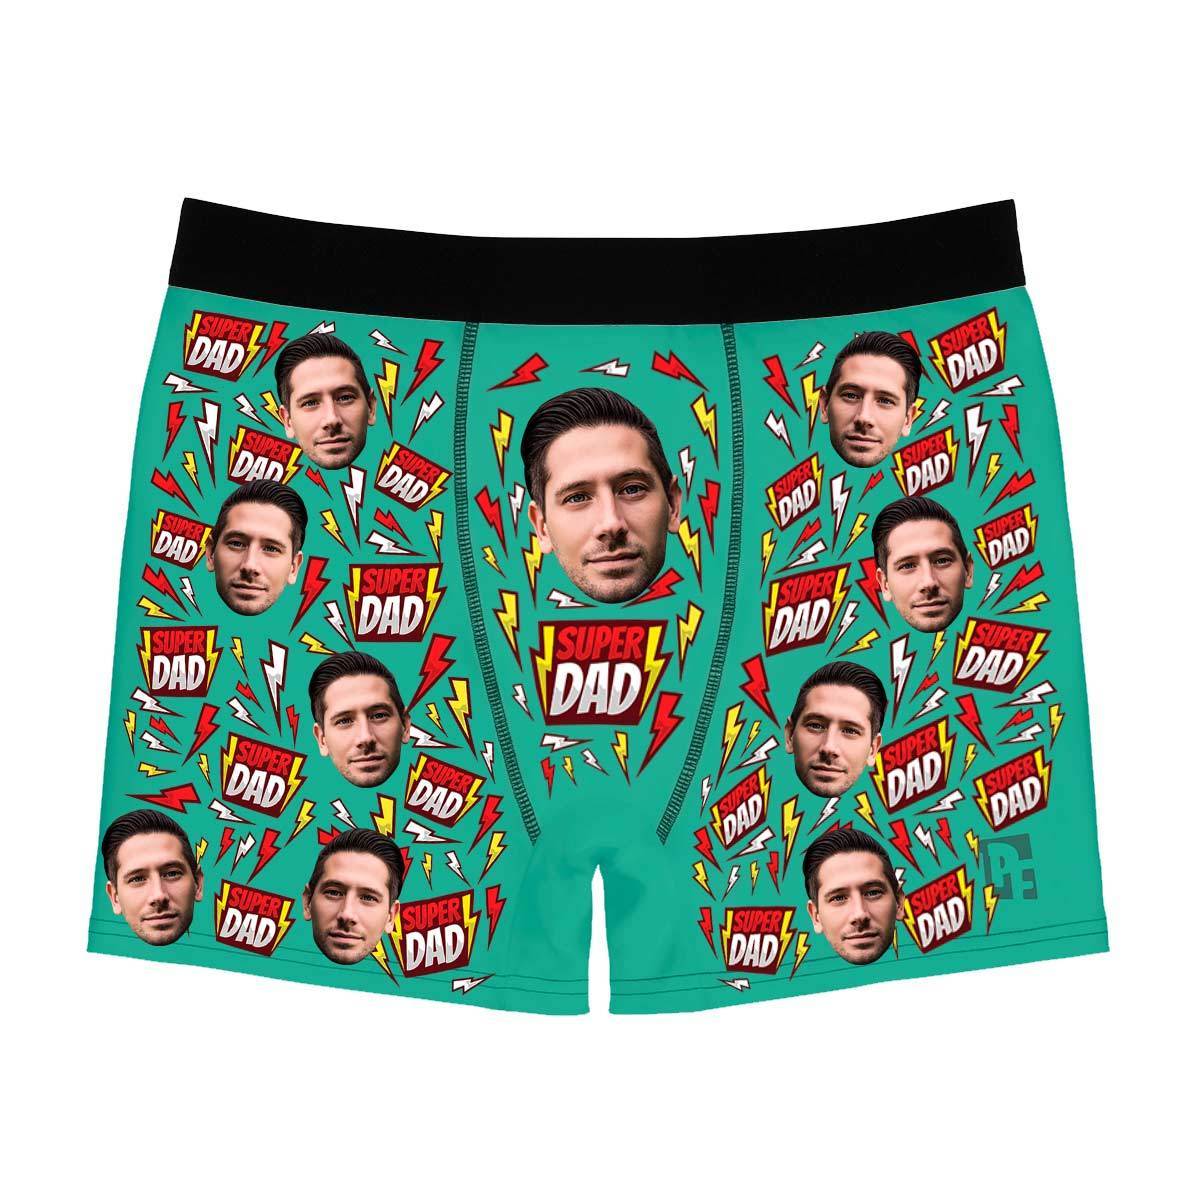 Mint Super dad men's boxer briefs personalized with photo printed on them